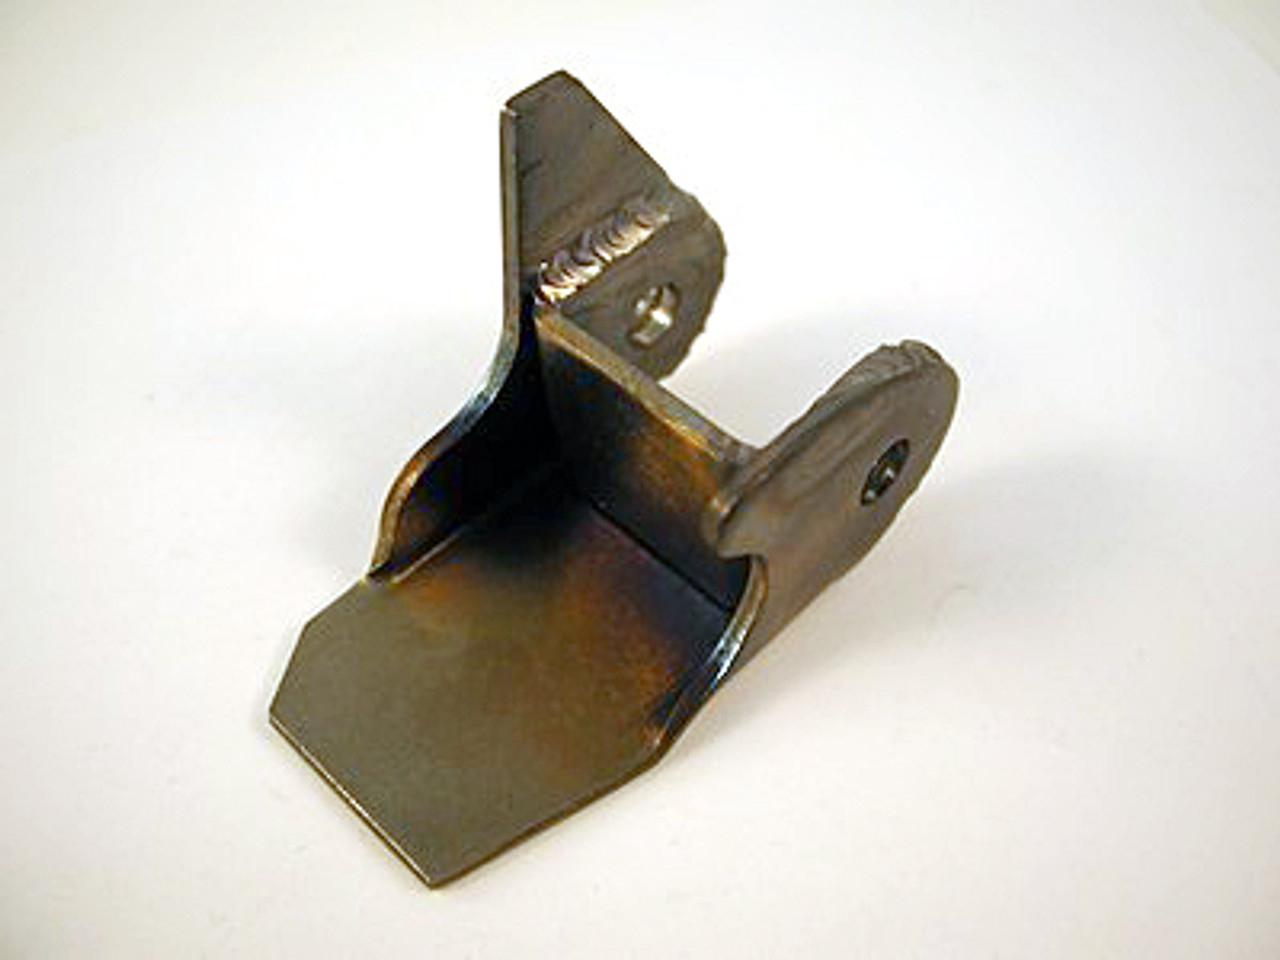 U12767-000   UNIVAIR FRONT WING ATTACH FITTING - LEFT - FITS PIPER PA-18